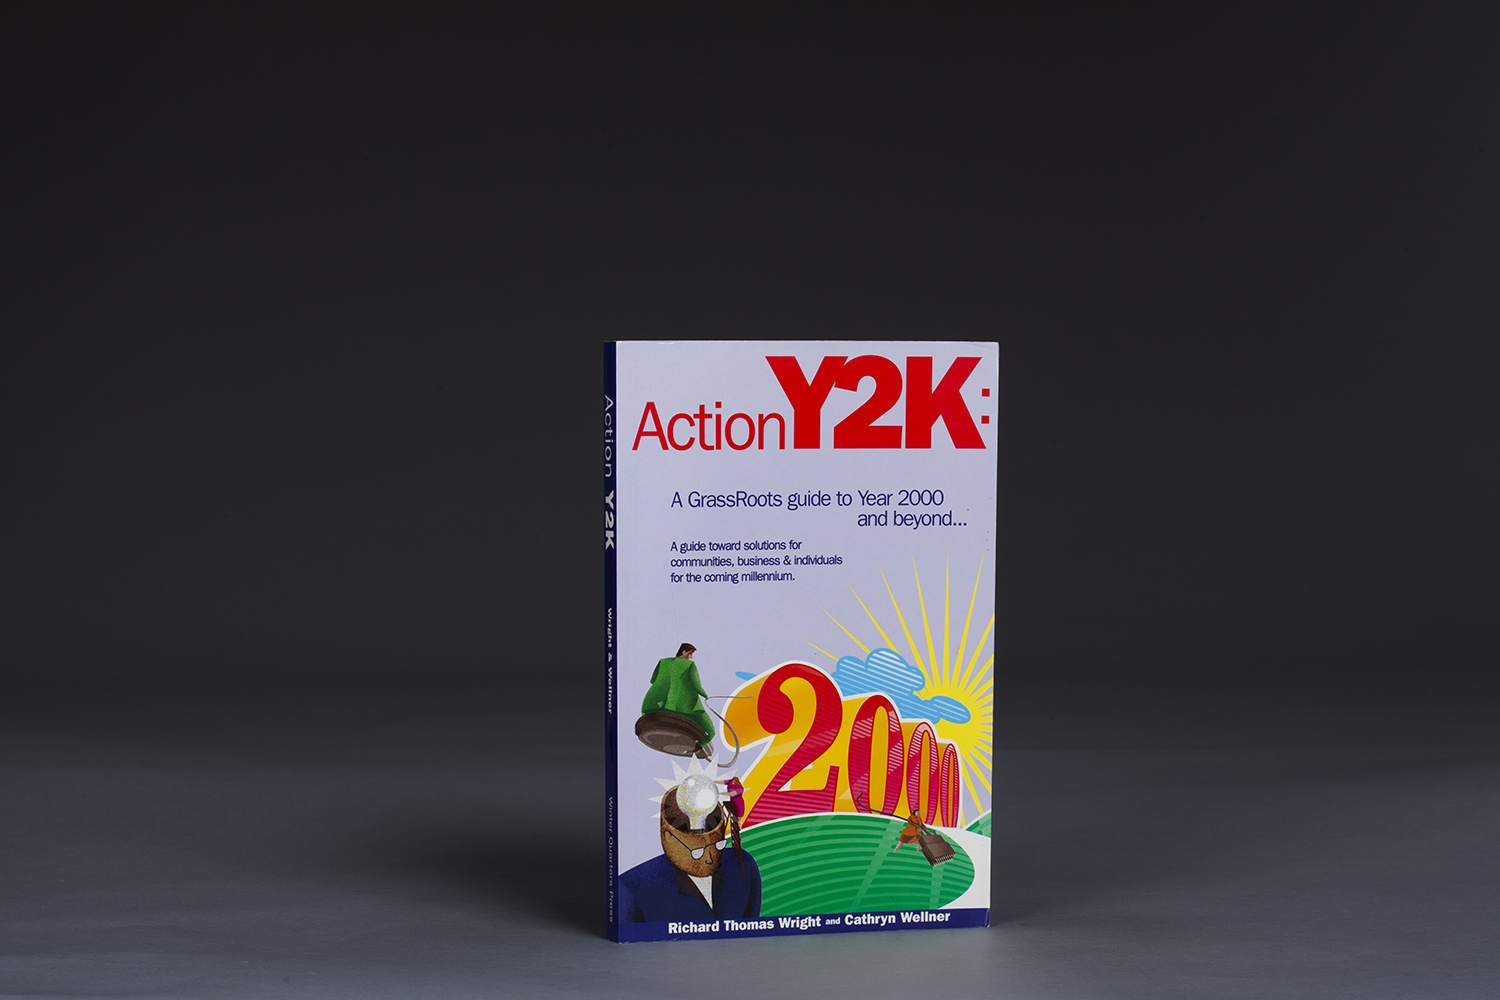 Action Y2K - A Grassroots Guide - 0671 Cover.jpg